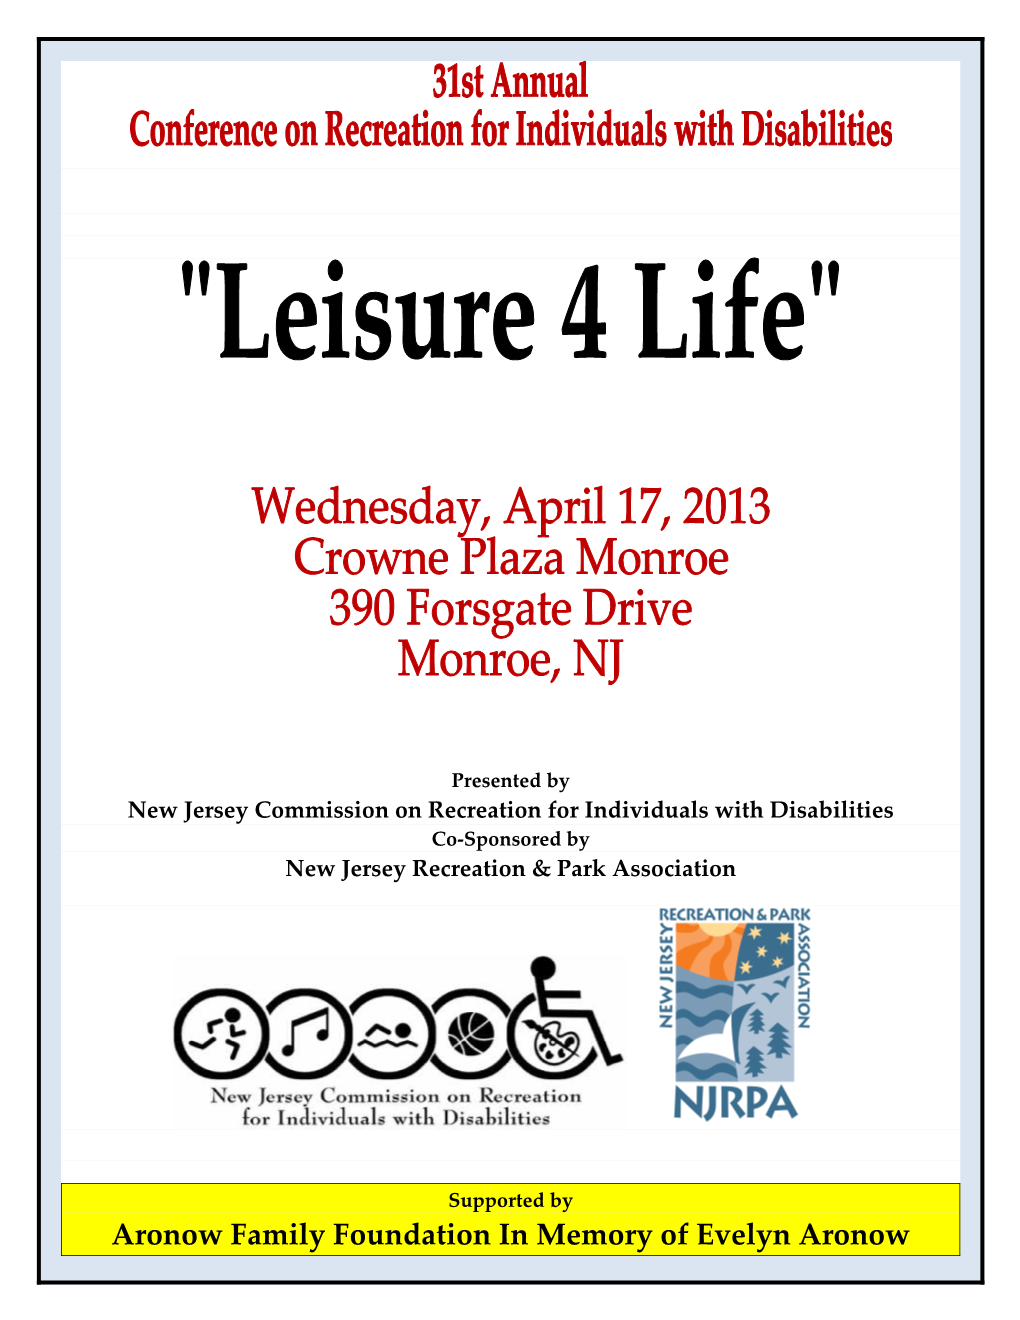 New Jersey Commission on Recreation for Individuals with Disabilities